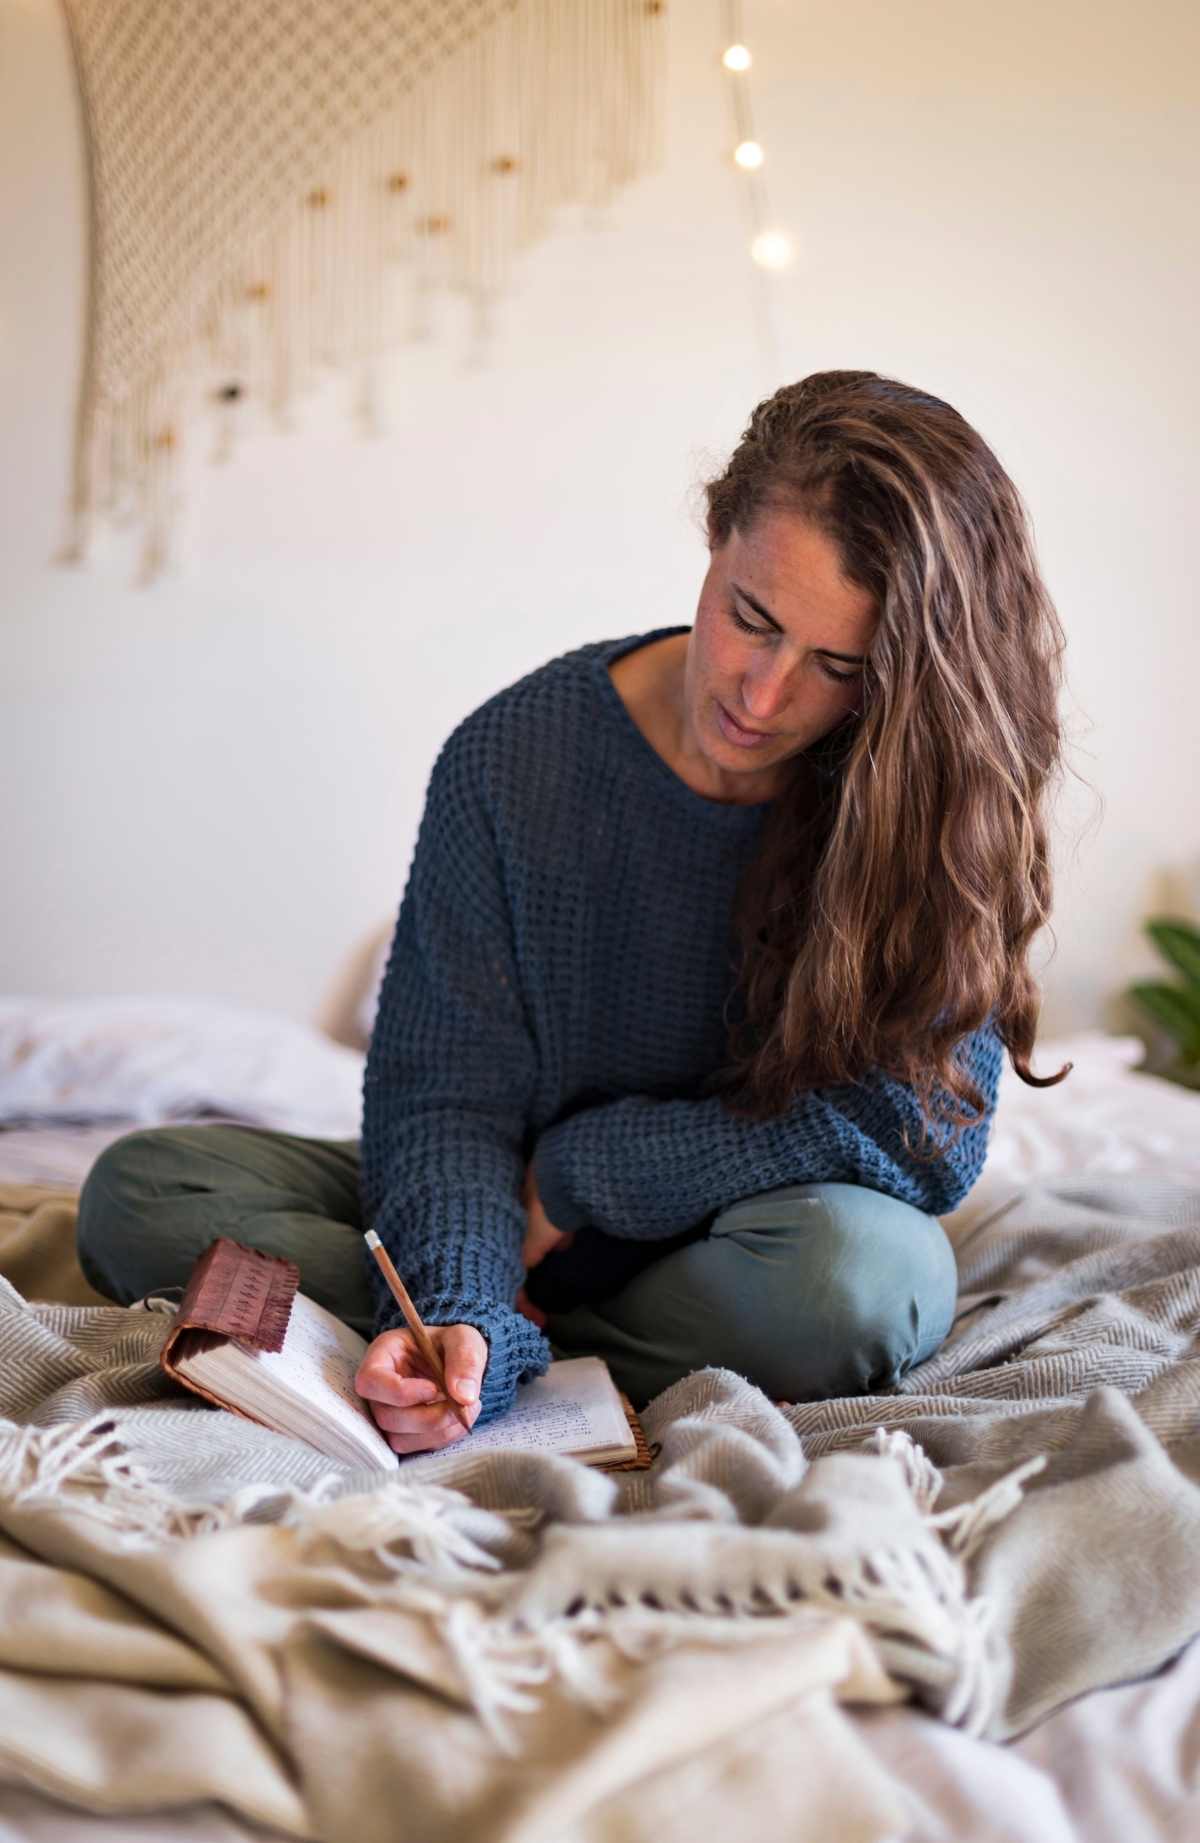 Journaling is a form of self-care that can be hugely beneficial for your mental health. There are many ways to express yourself through journaling. Here are 21 powerful types of journaling you can try today.